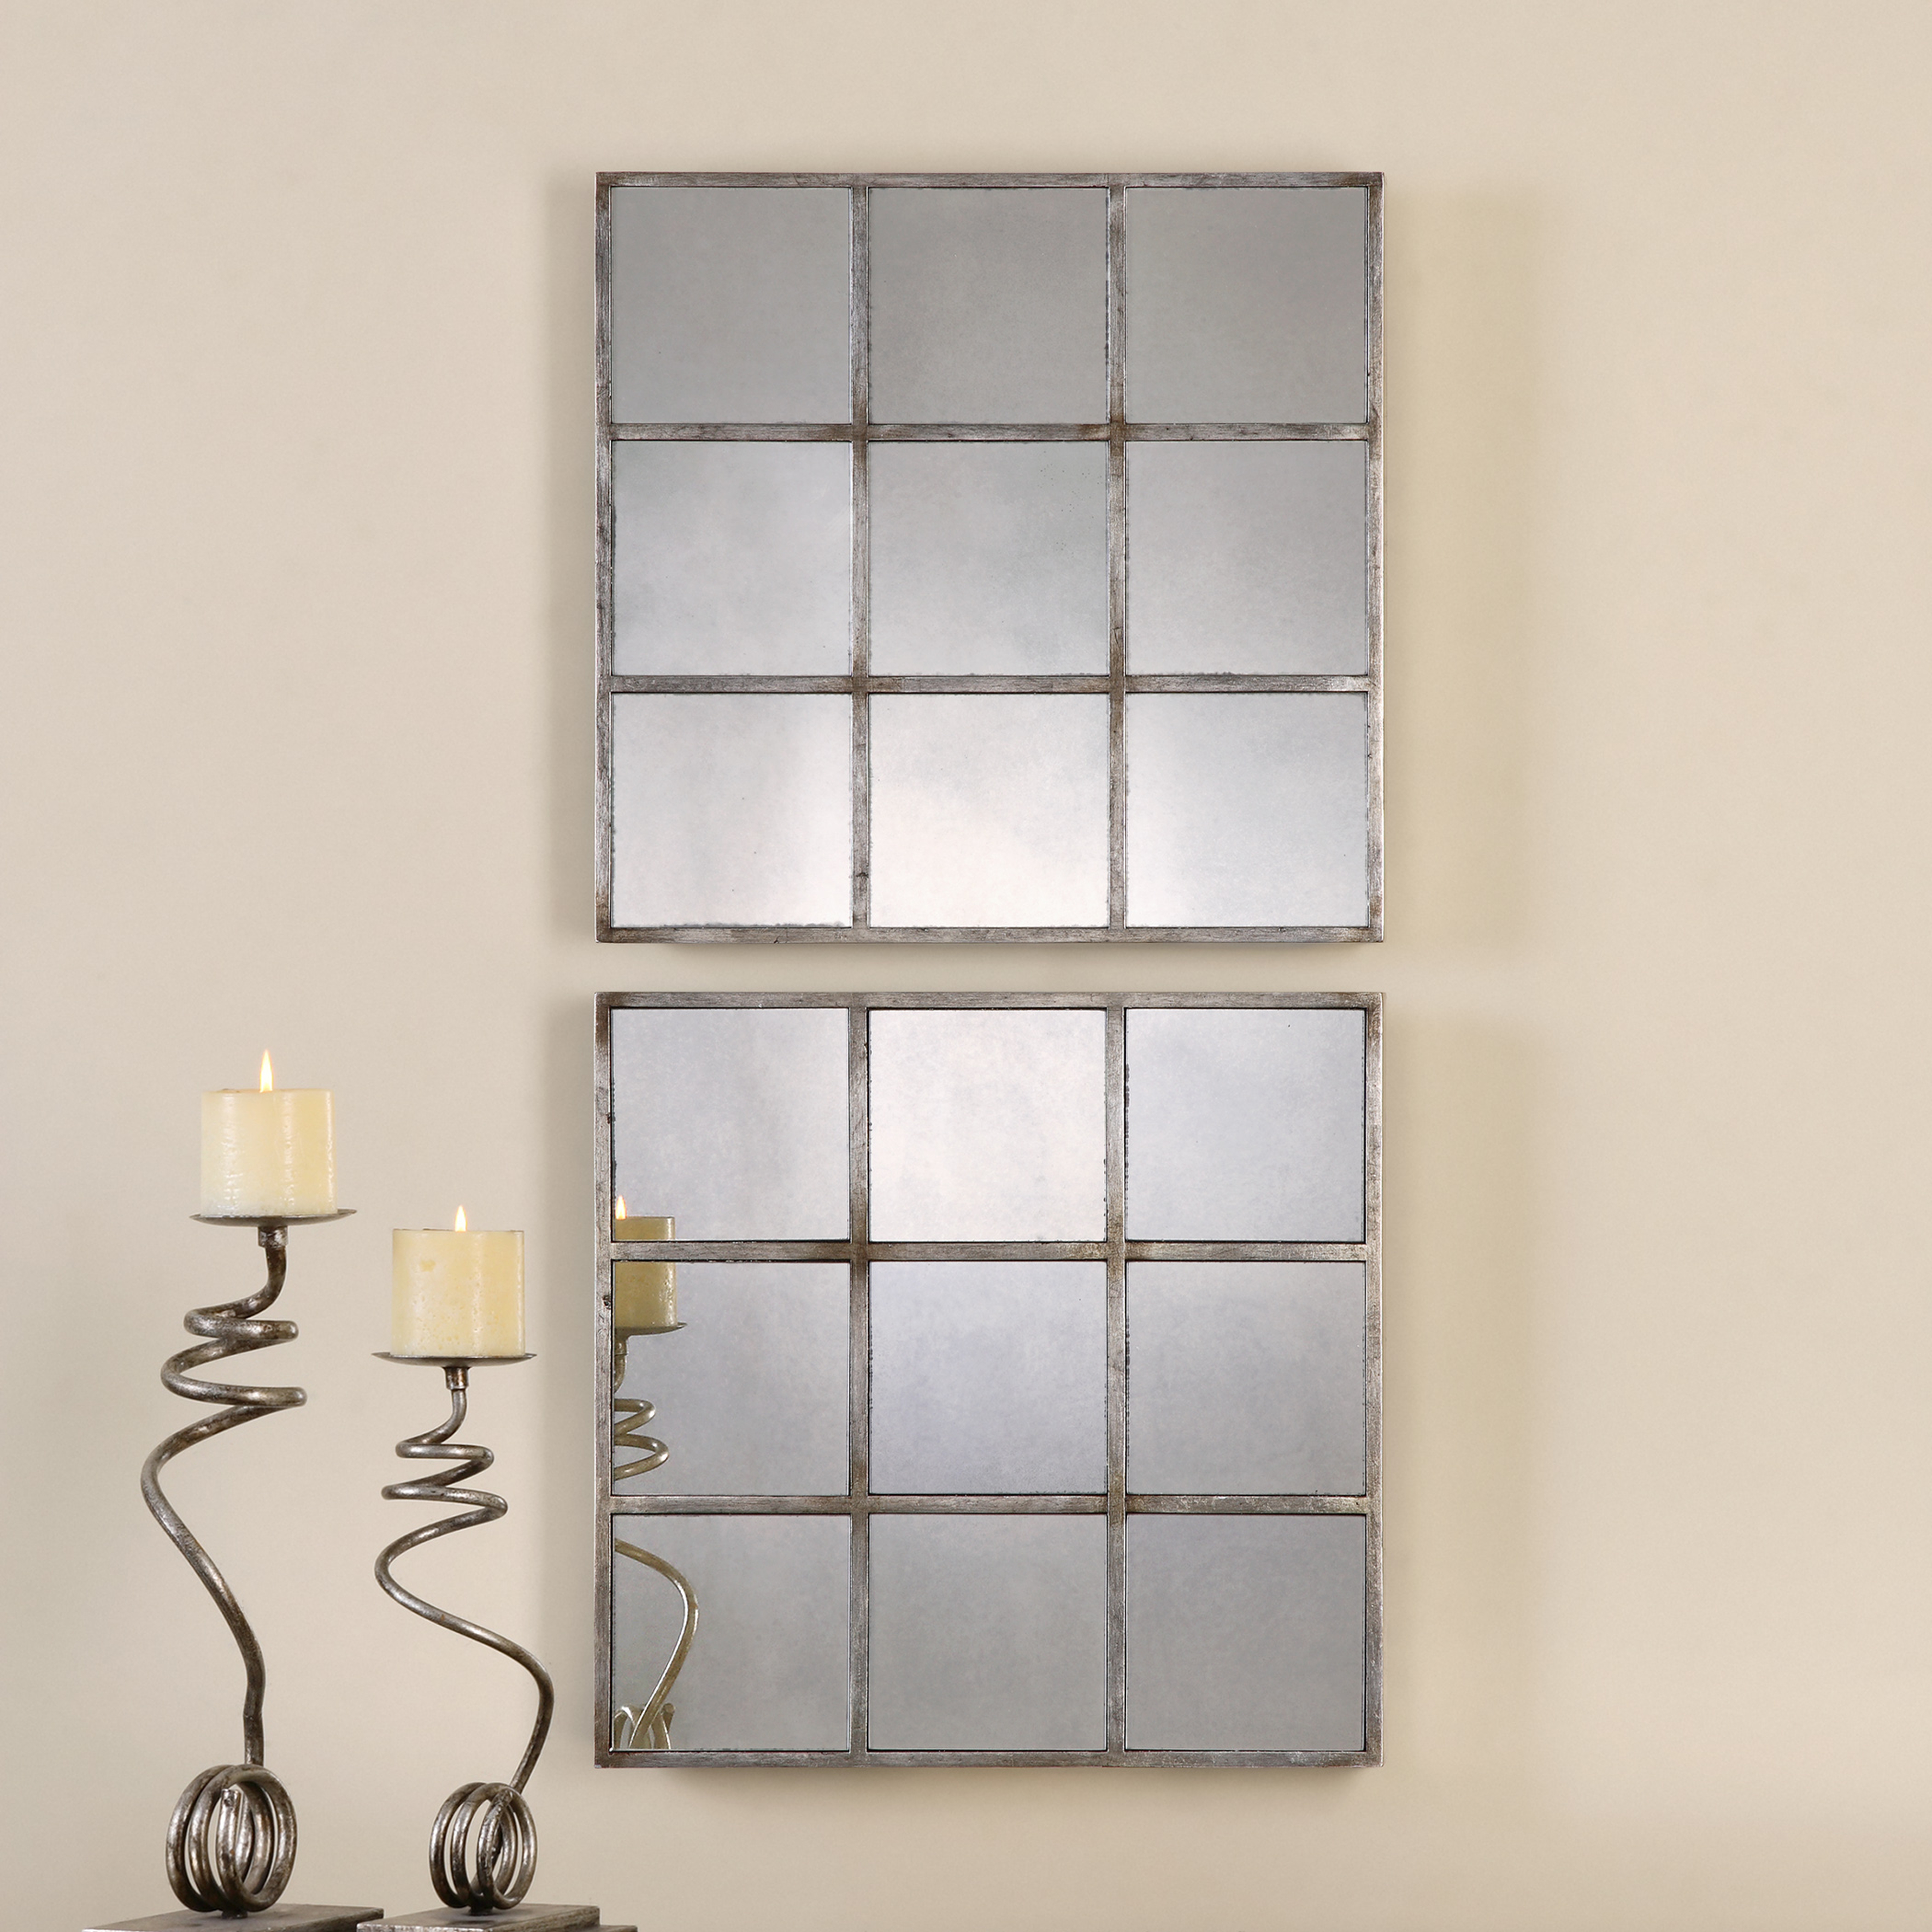 Derowen Squares Antique Mirrors S/2 - Hudsonhill Foundry